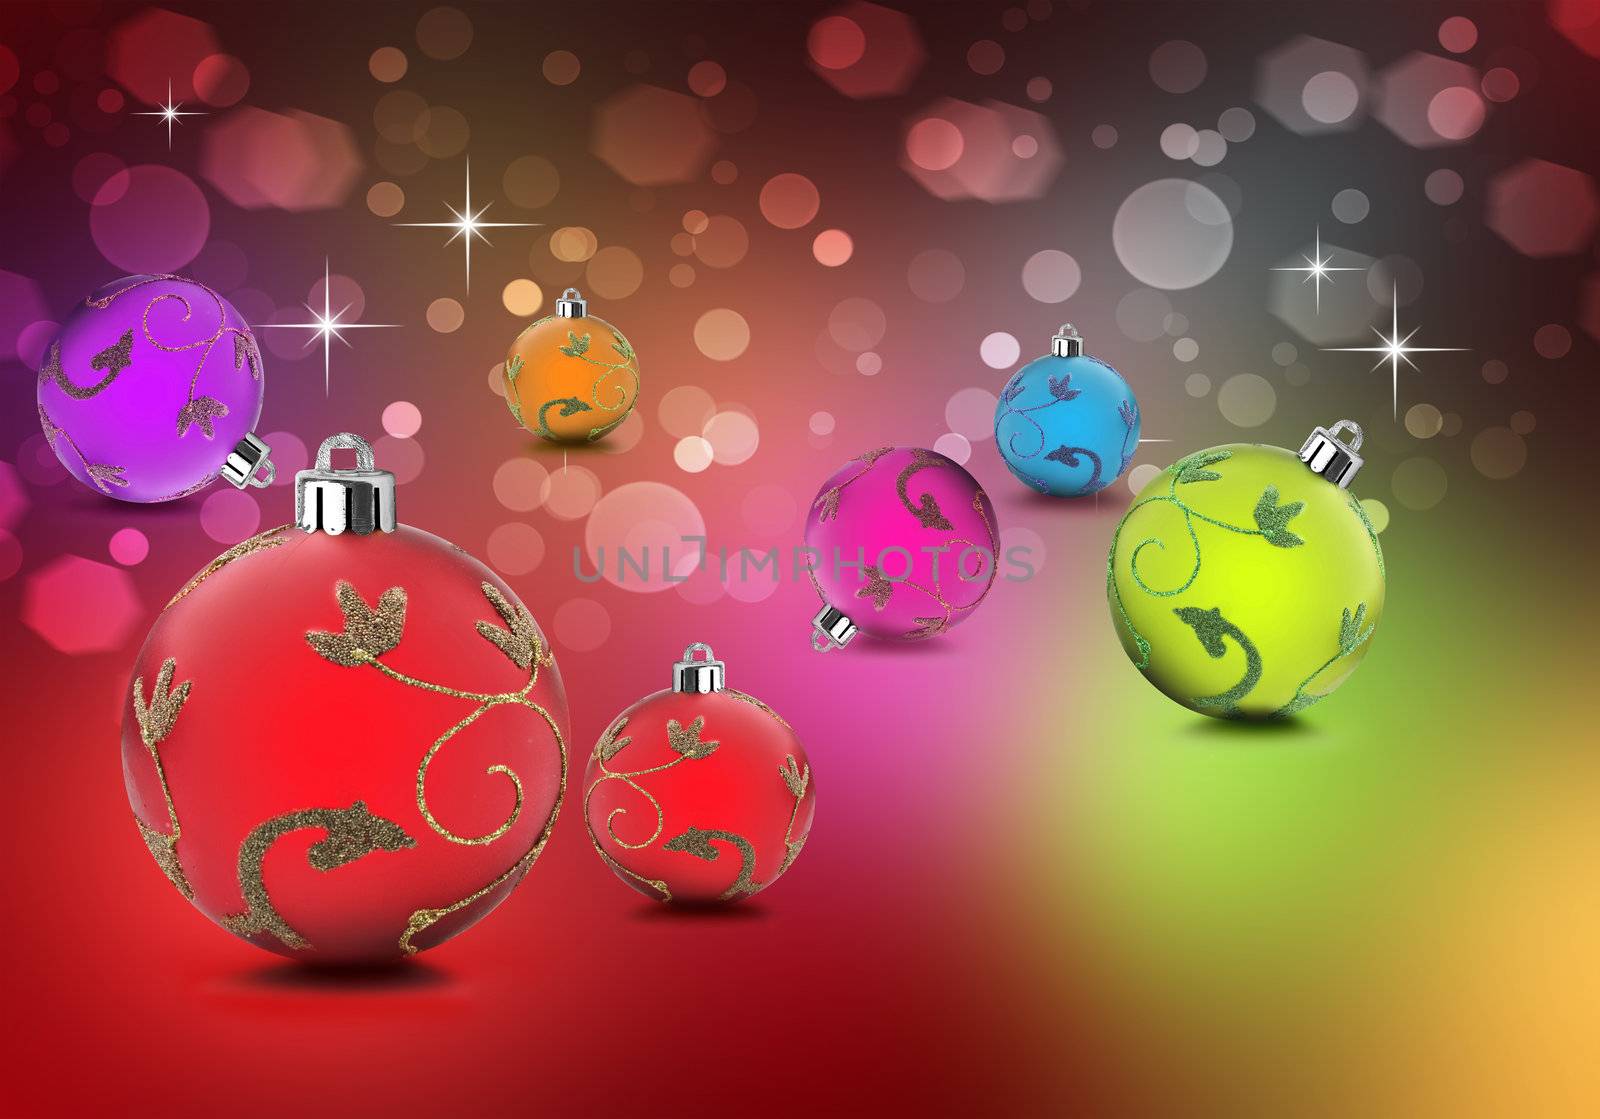 Christmas in bright colors against a colorful background